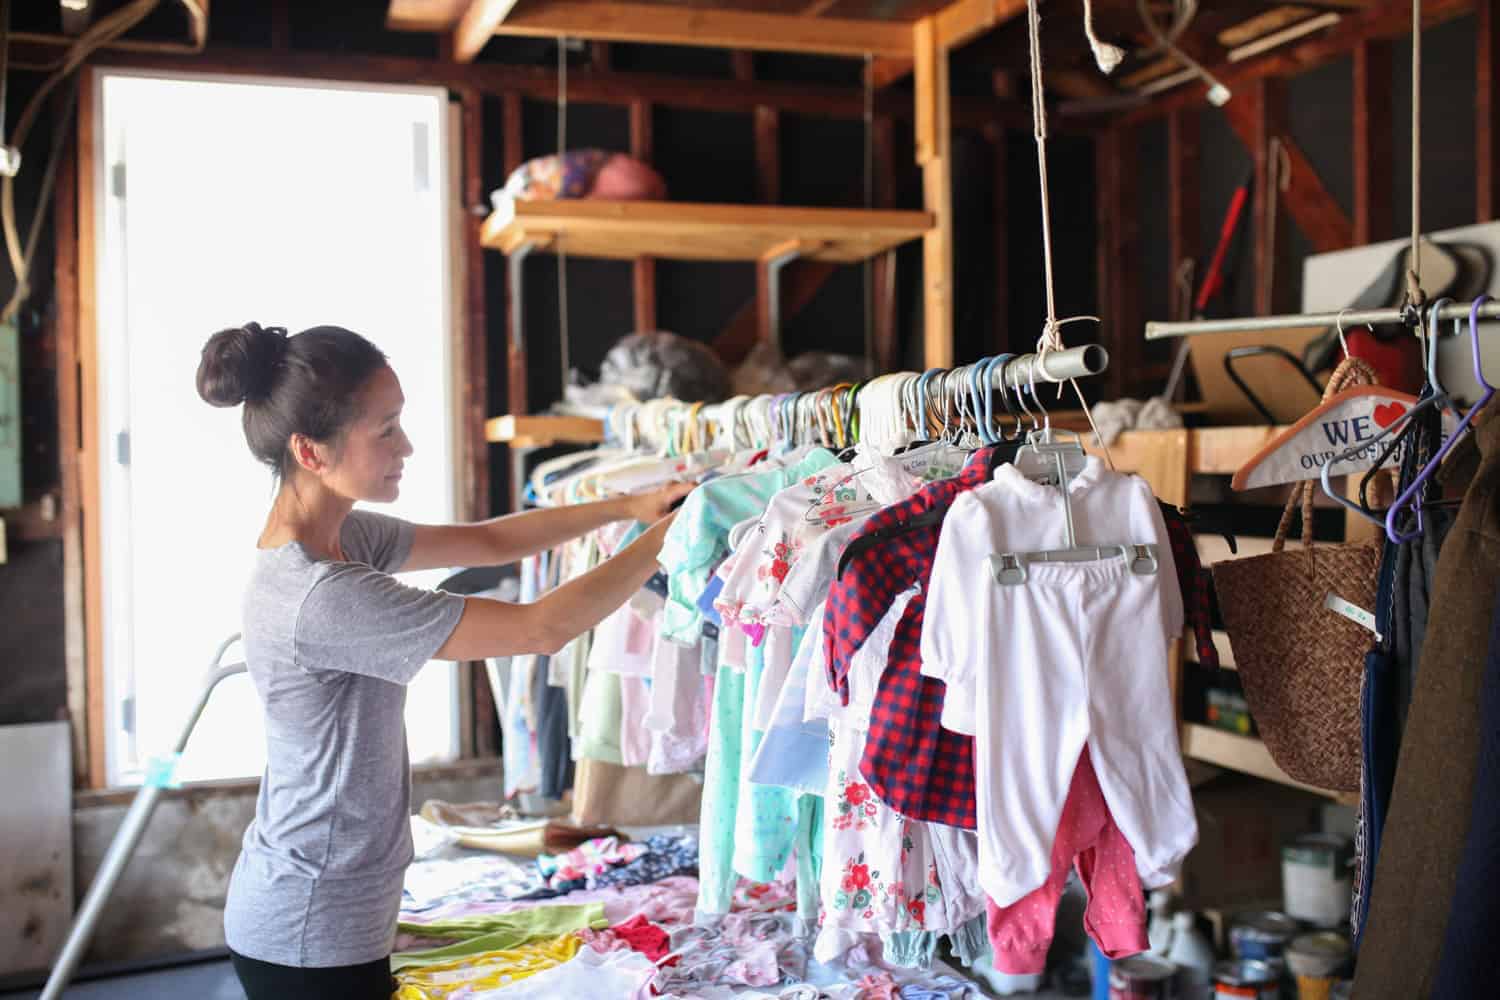 woman looking through hanging childrens clothing at a garage sale